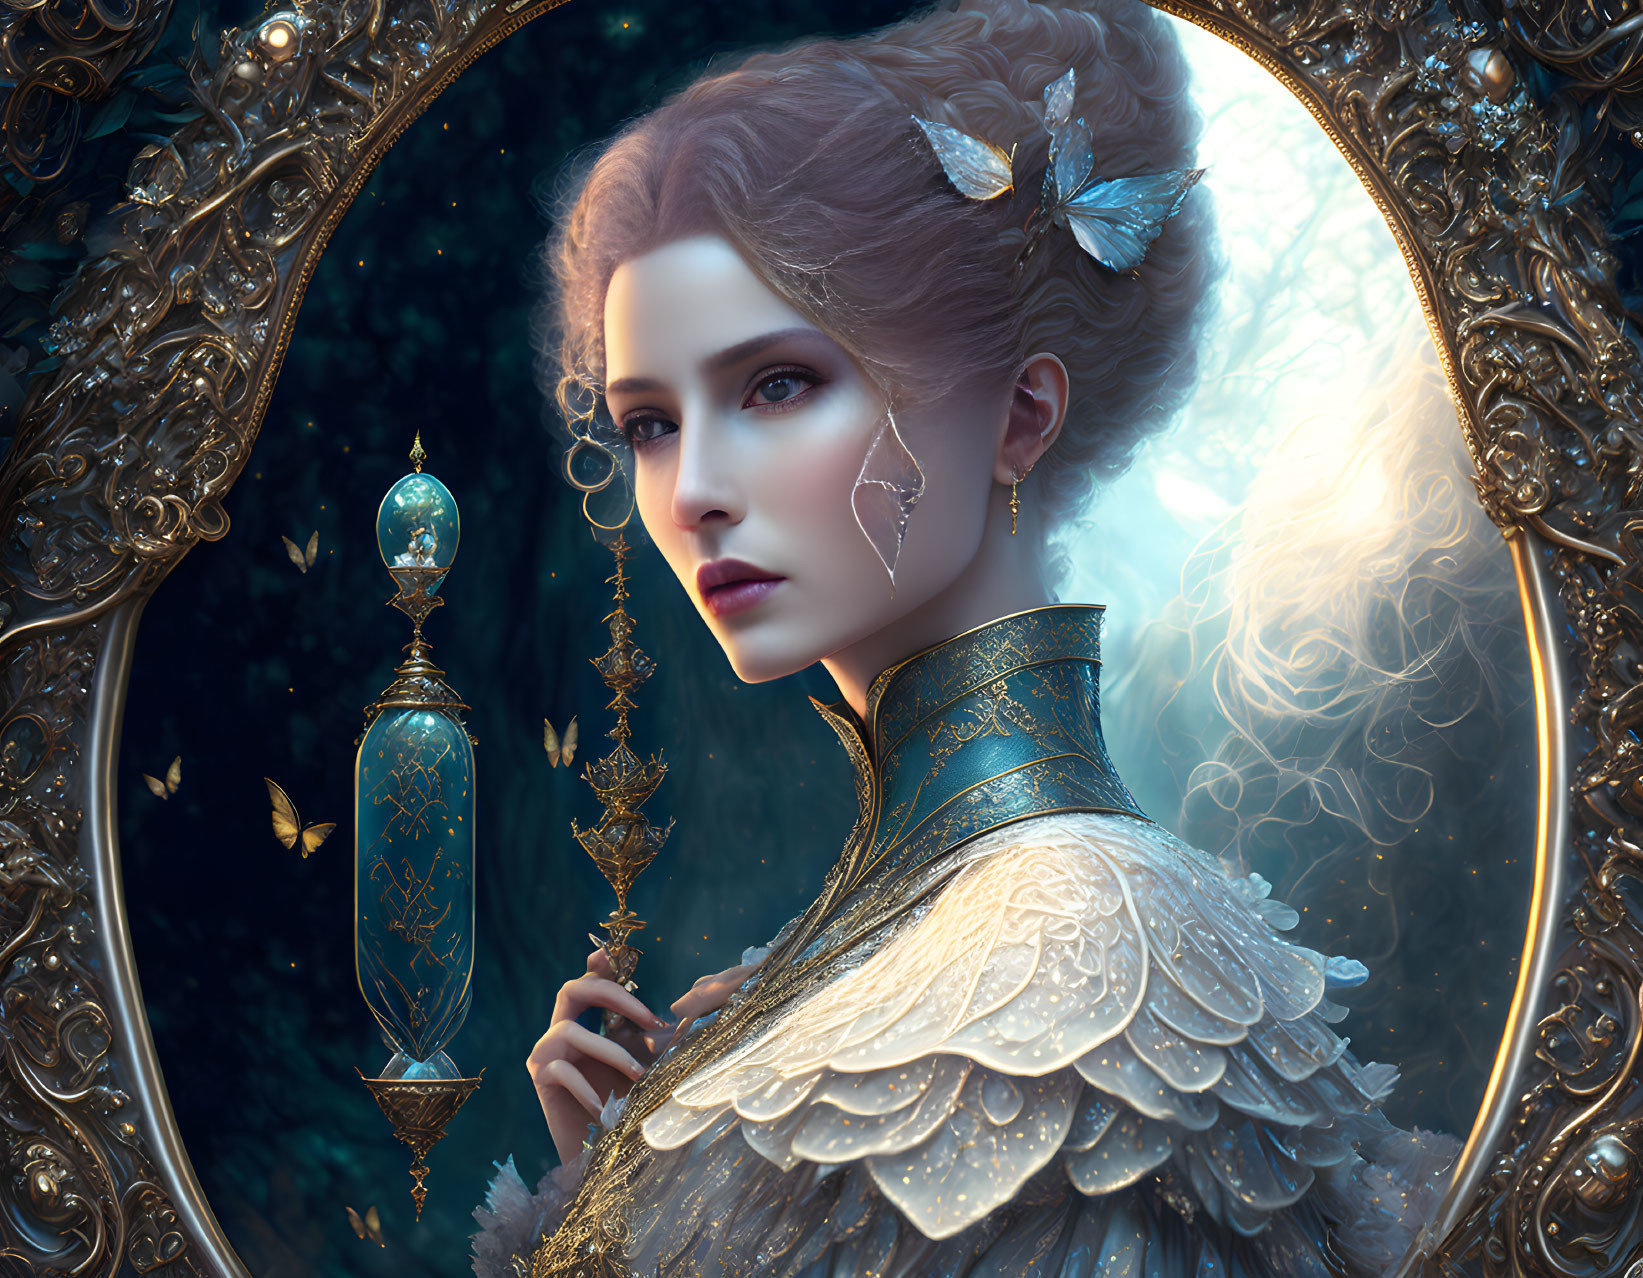 Ornately dressed woman with golden attire and scepter in front of starry mirror